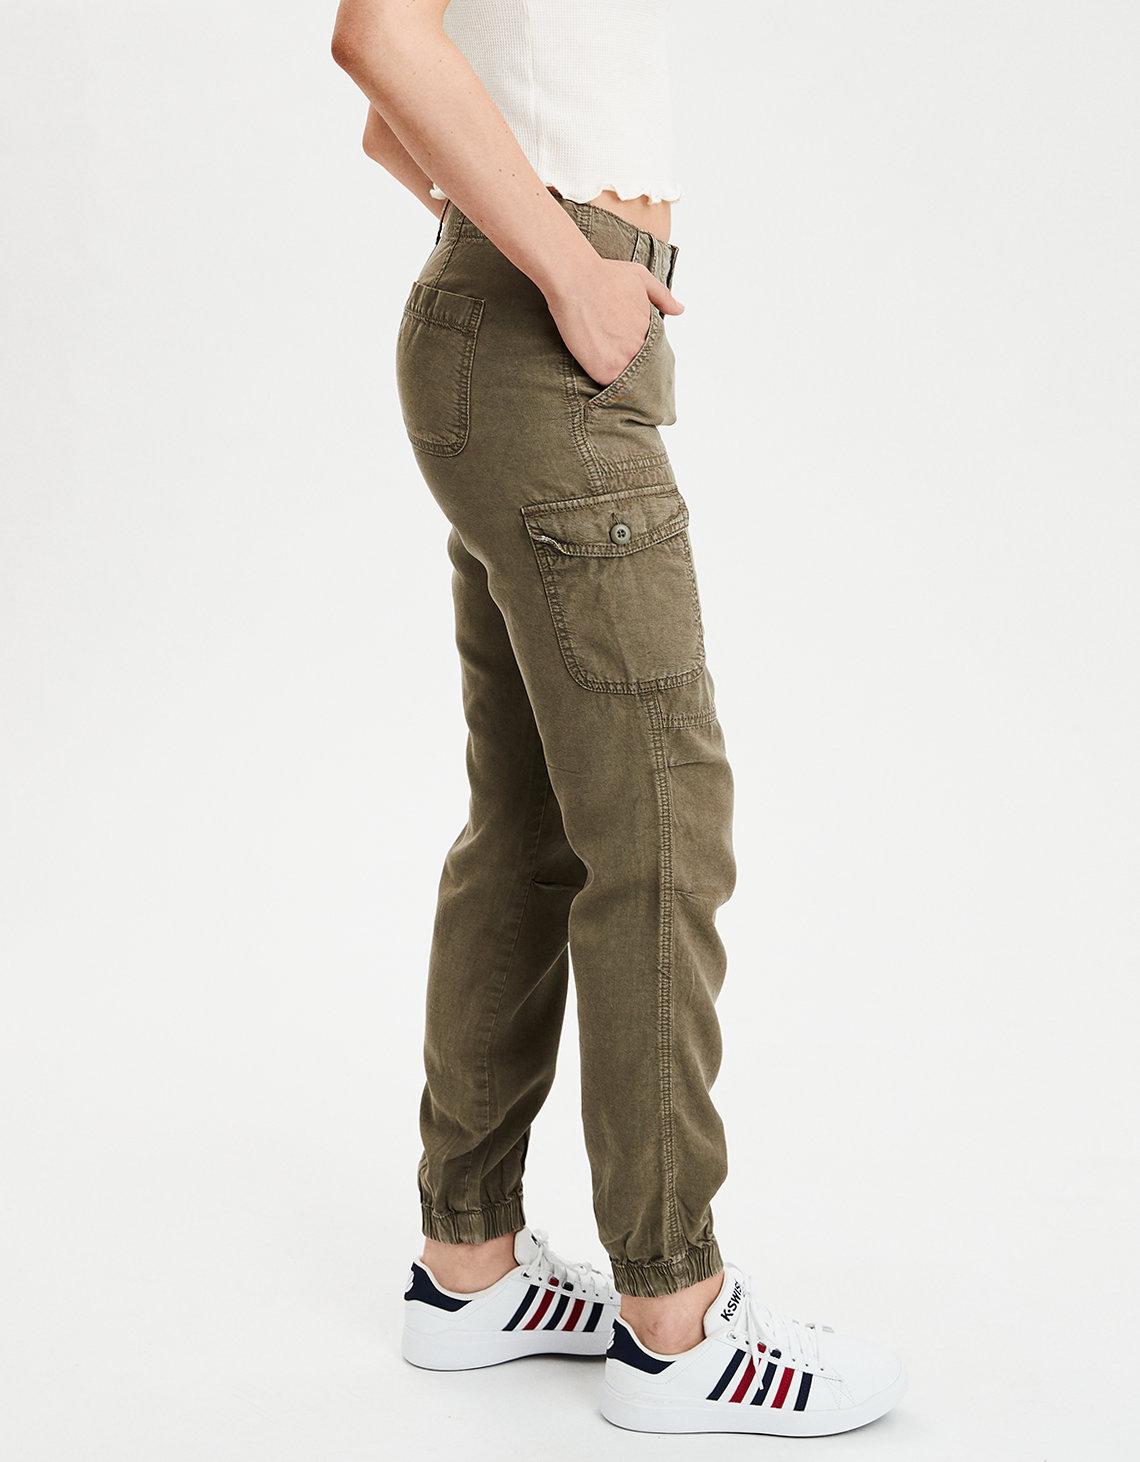 olive green cargo pants american eagle